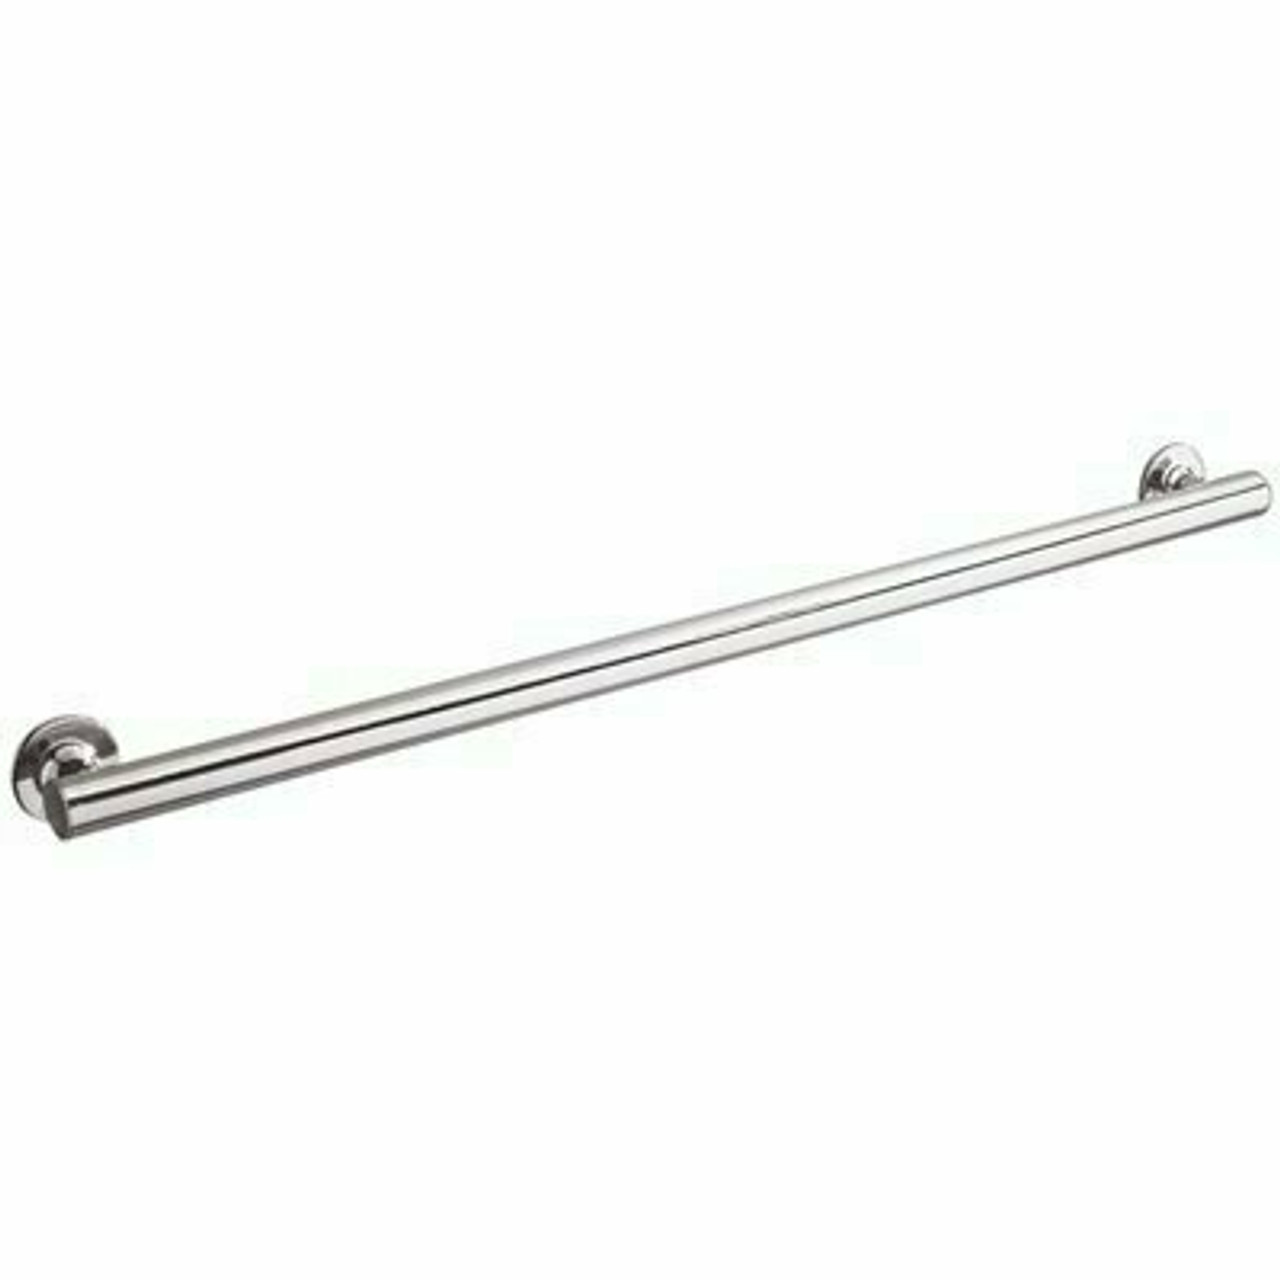 Kohler Purist 24 In. X 2.4375 In. Concealed Screwgrab Bar In Polished Stainless